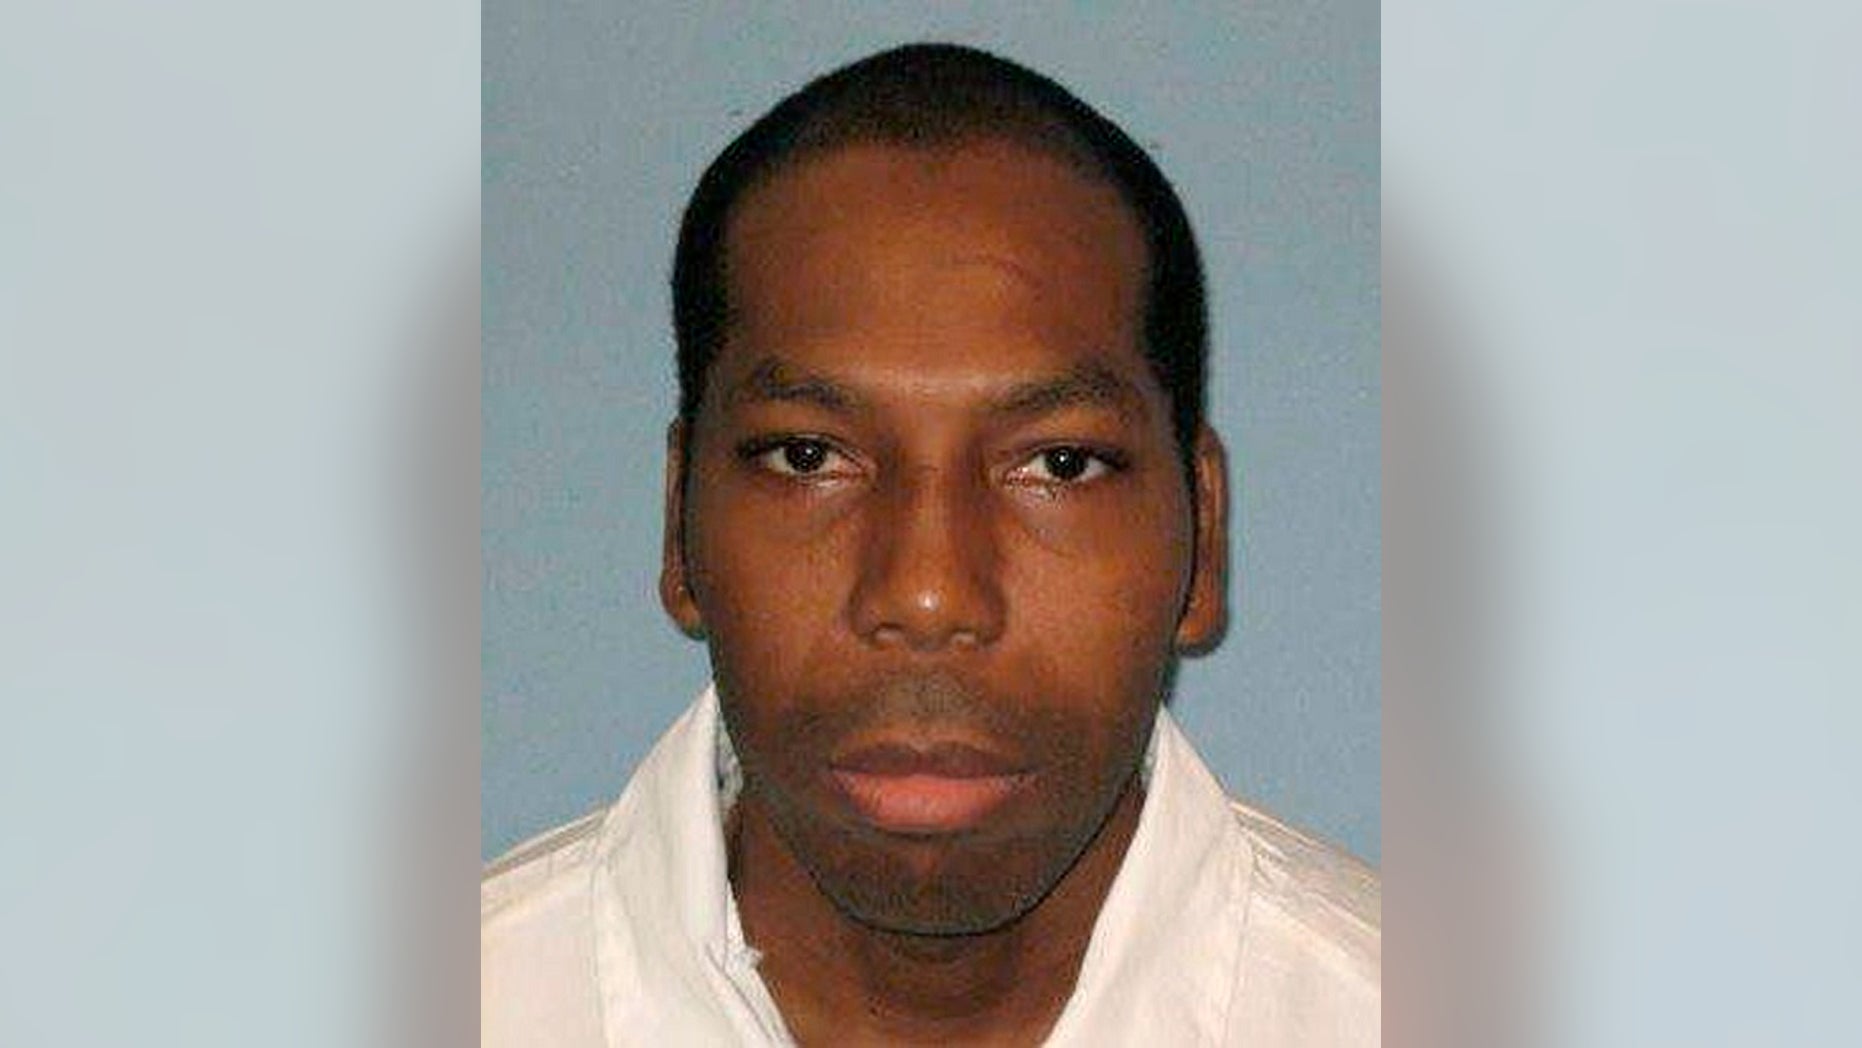 FILE - This undated file photo from the Alabama Department of Corrections shows inmate Dominique Ray. (Alabama Department of Corrections via AP, File)